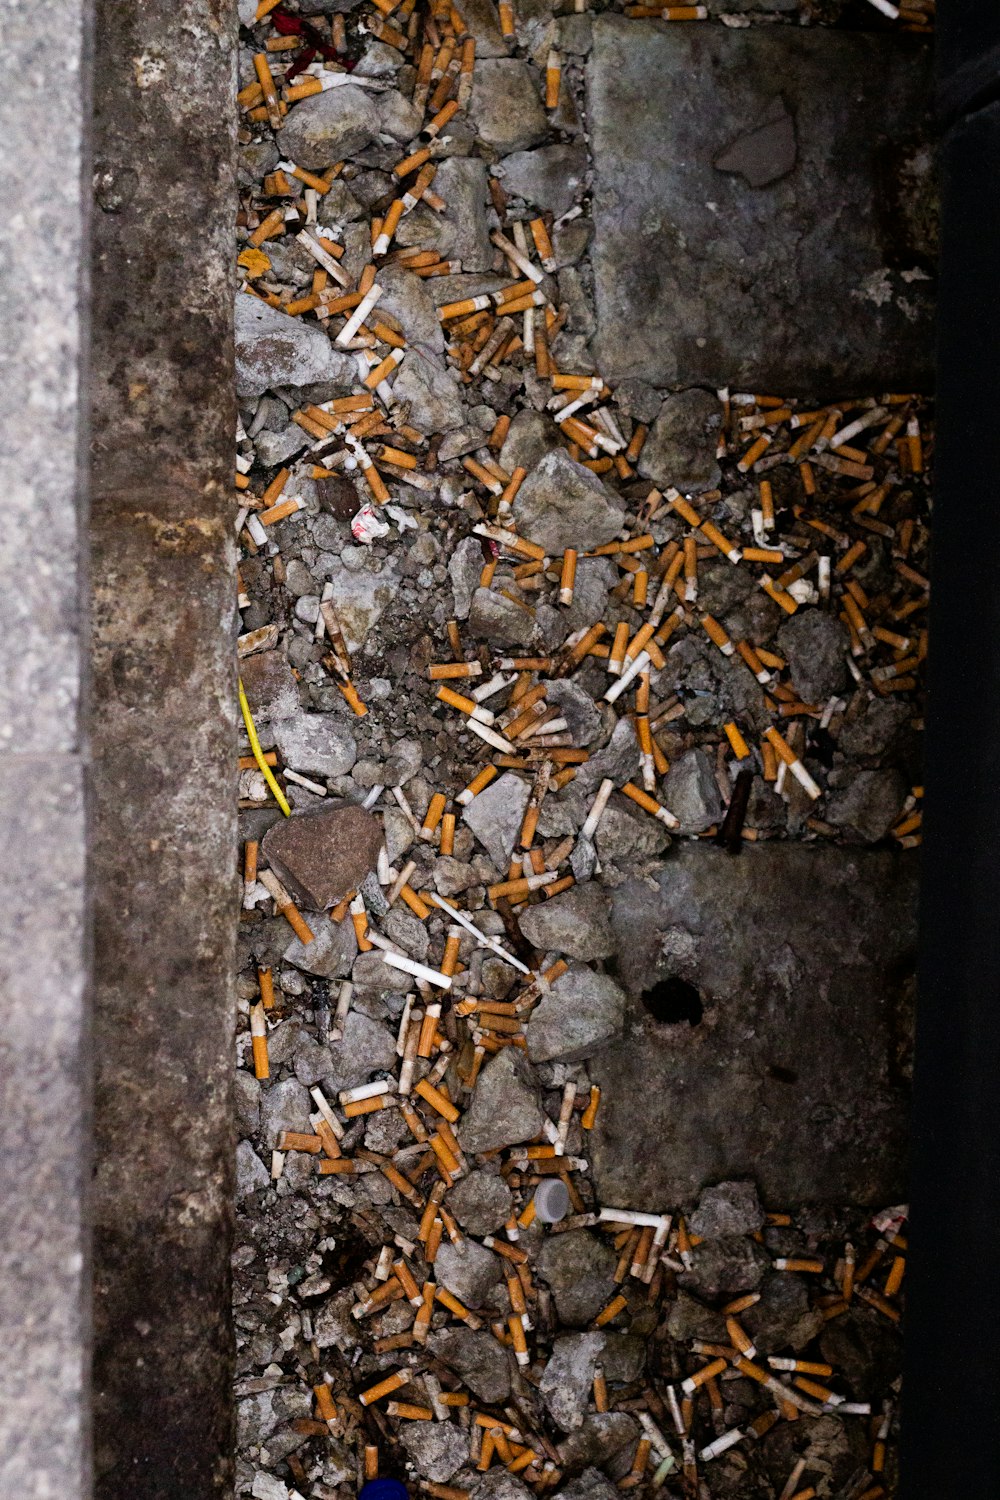 cigarette butts scattered on the ground